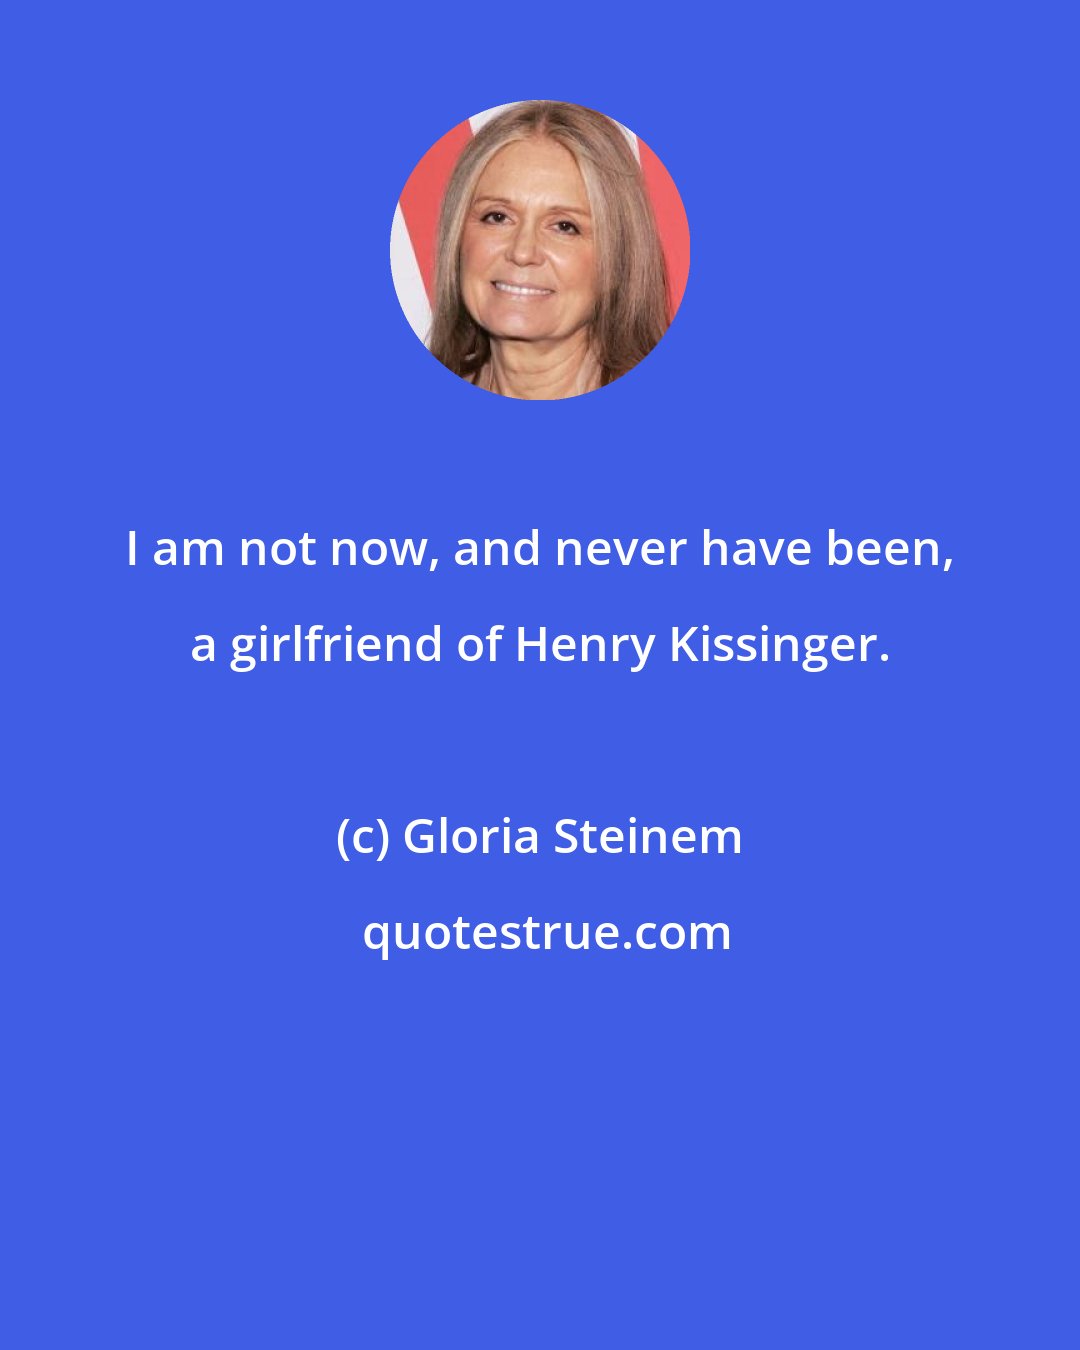 Gloria Steinem: I am not now, and never have been, a girlfriend of Henry Kissinger.